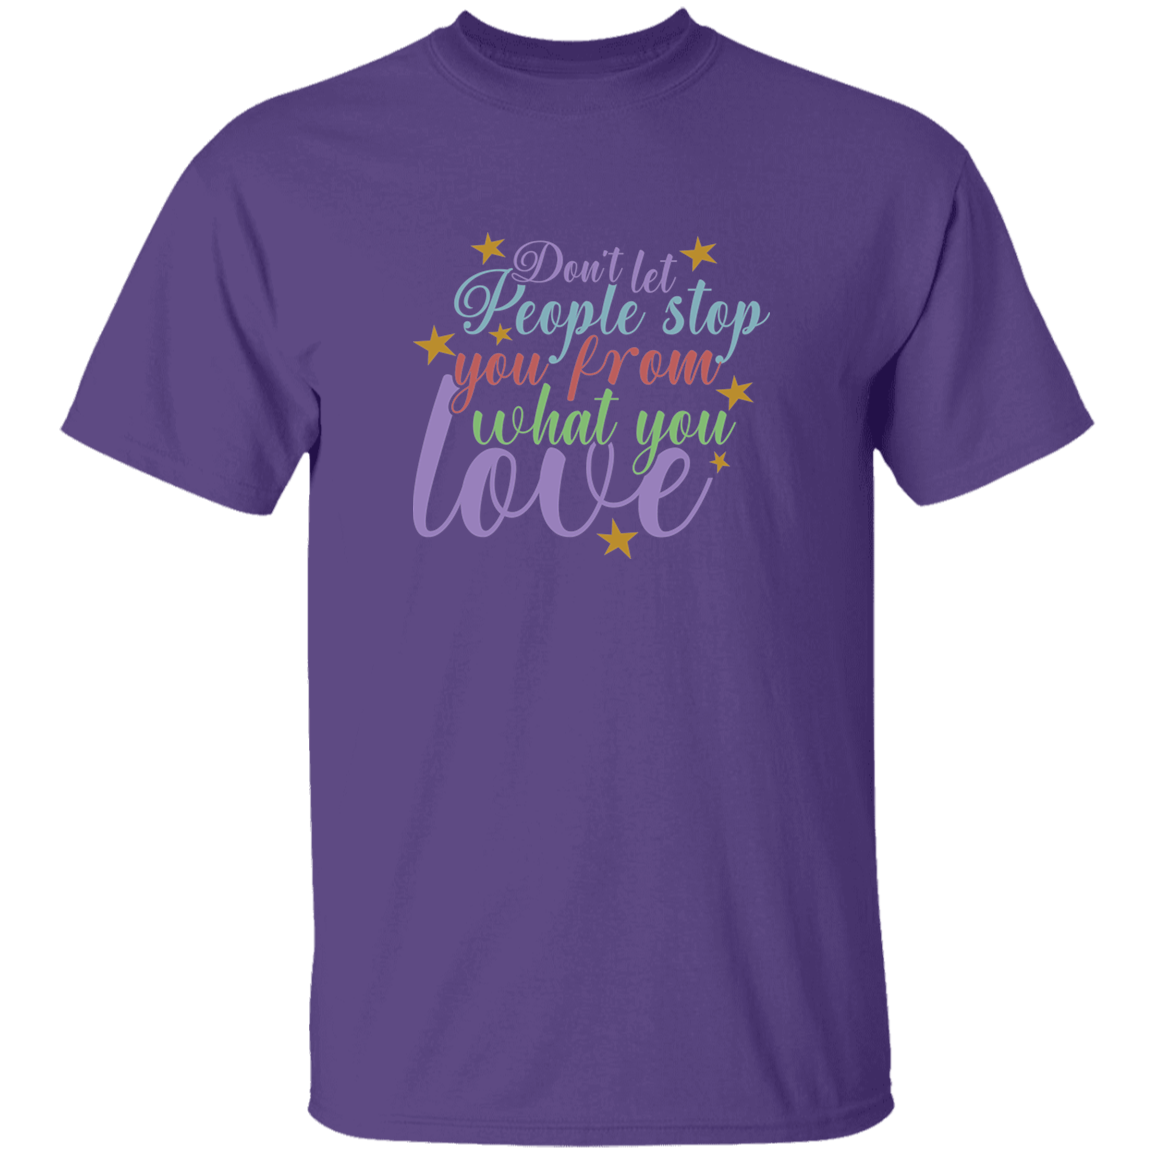 Don't Let People Stop You - G500 5.3 oz. T-Shirt